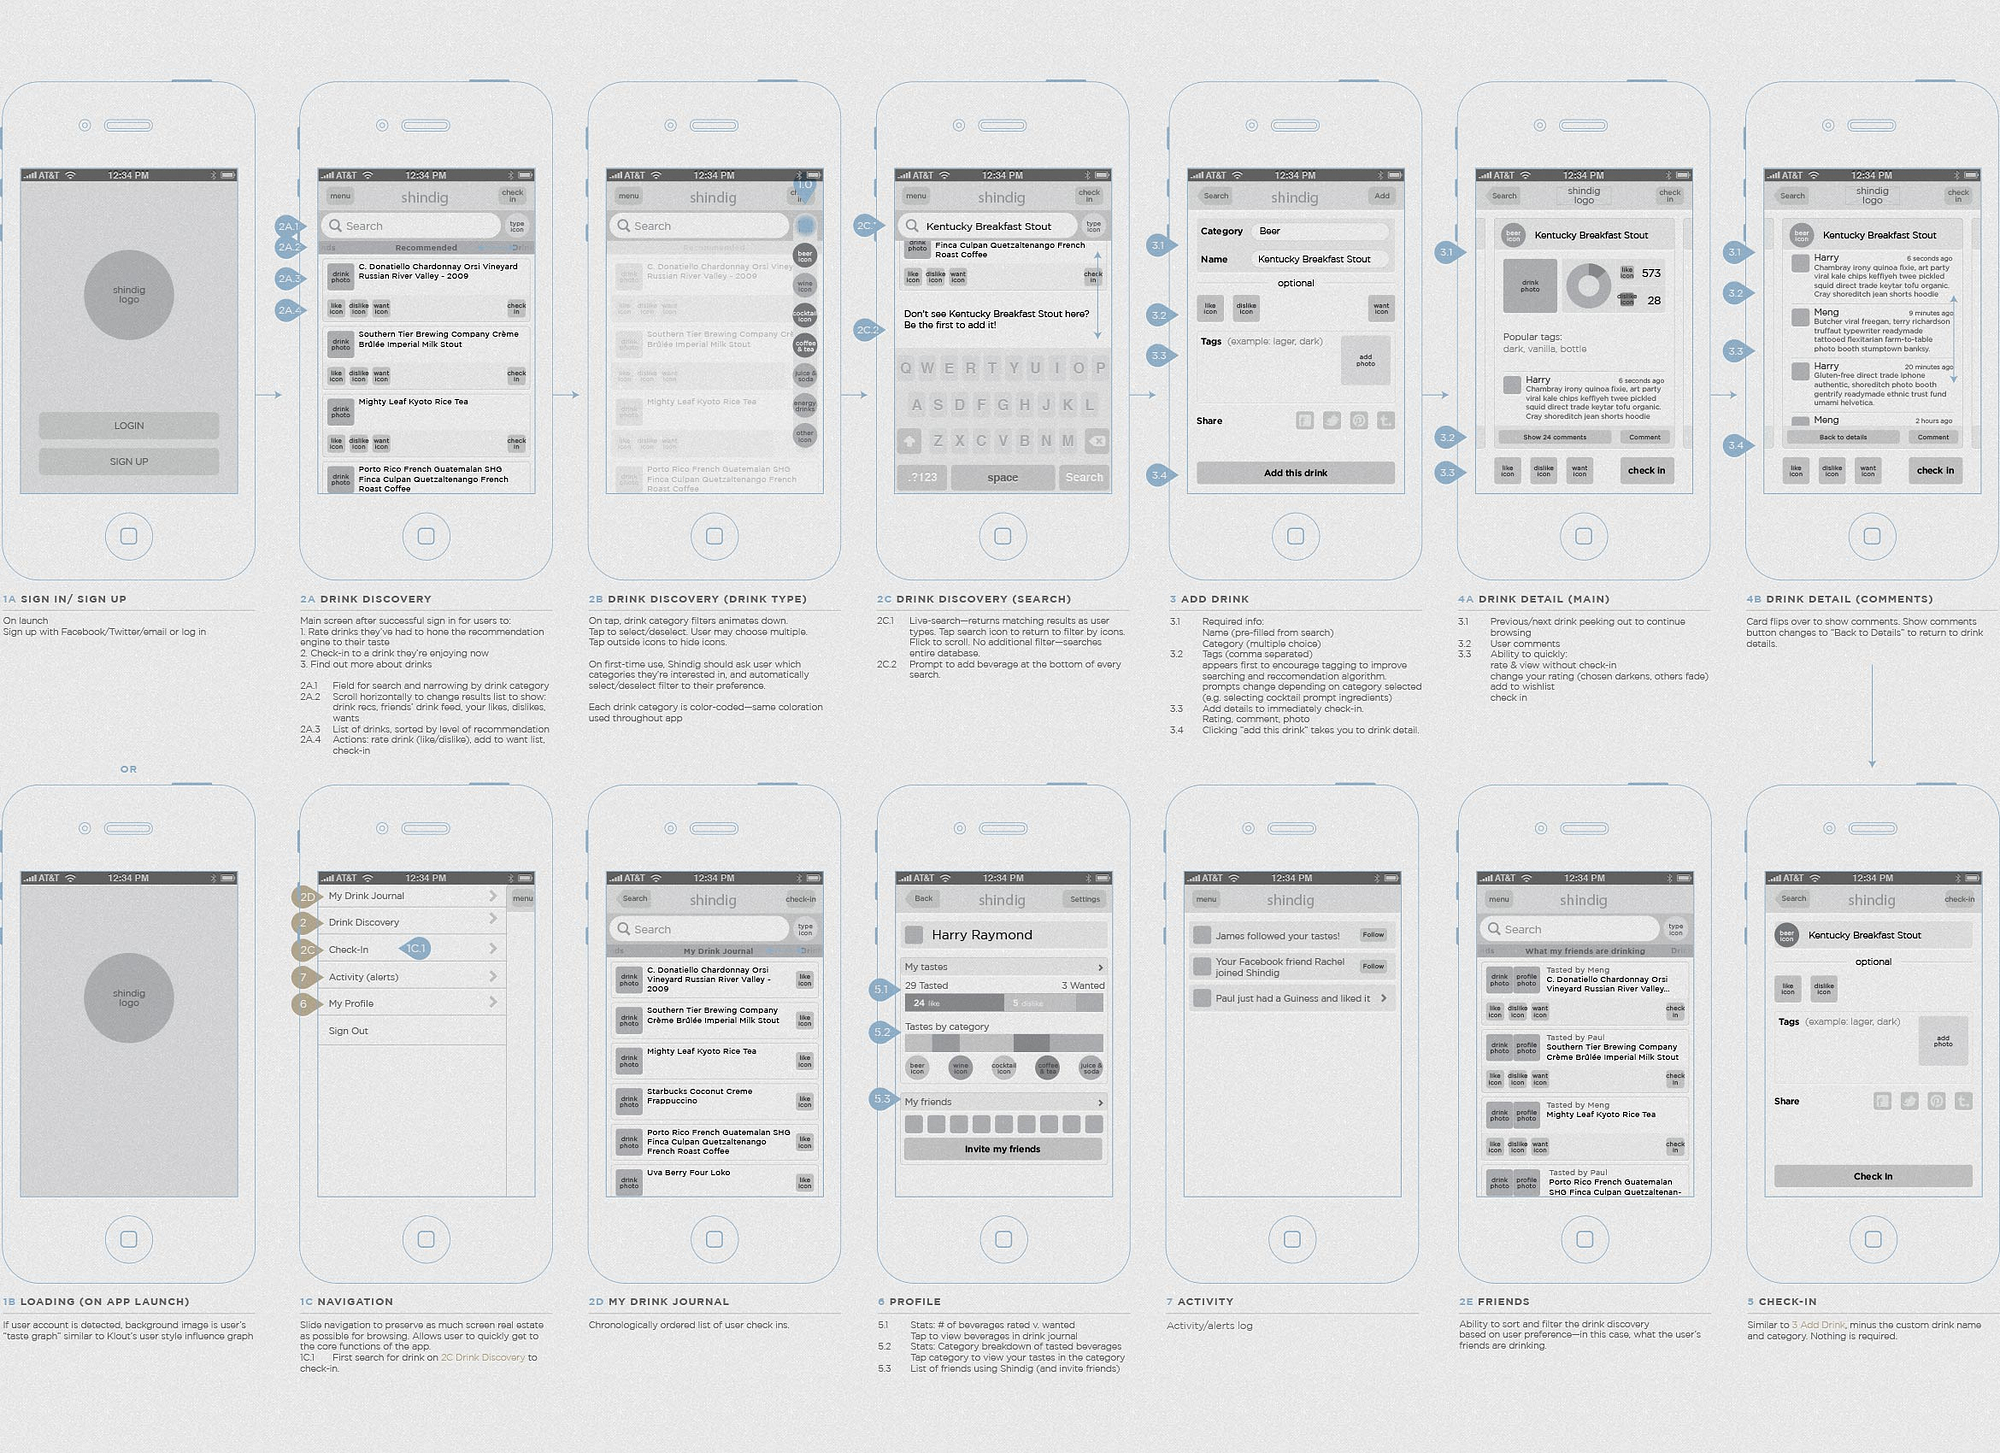 meng-he-shindig-app-wireframe@2x